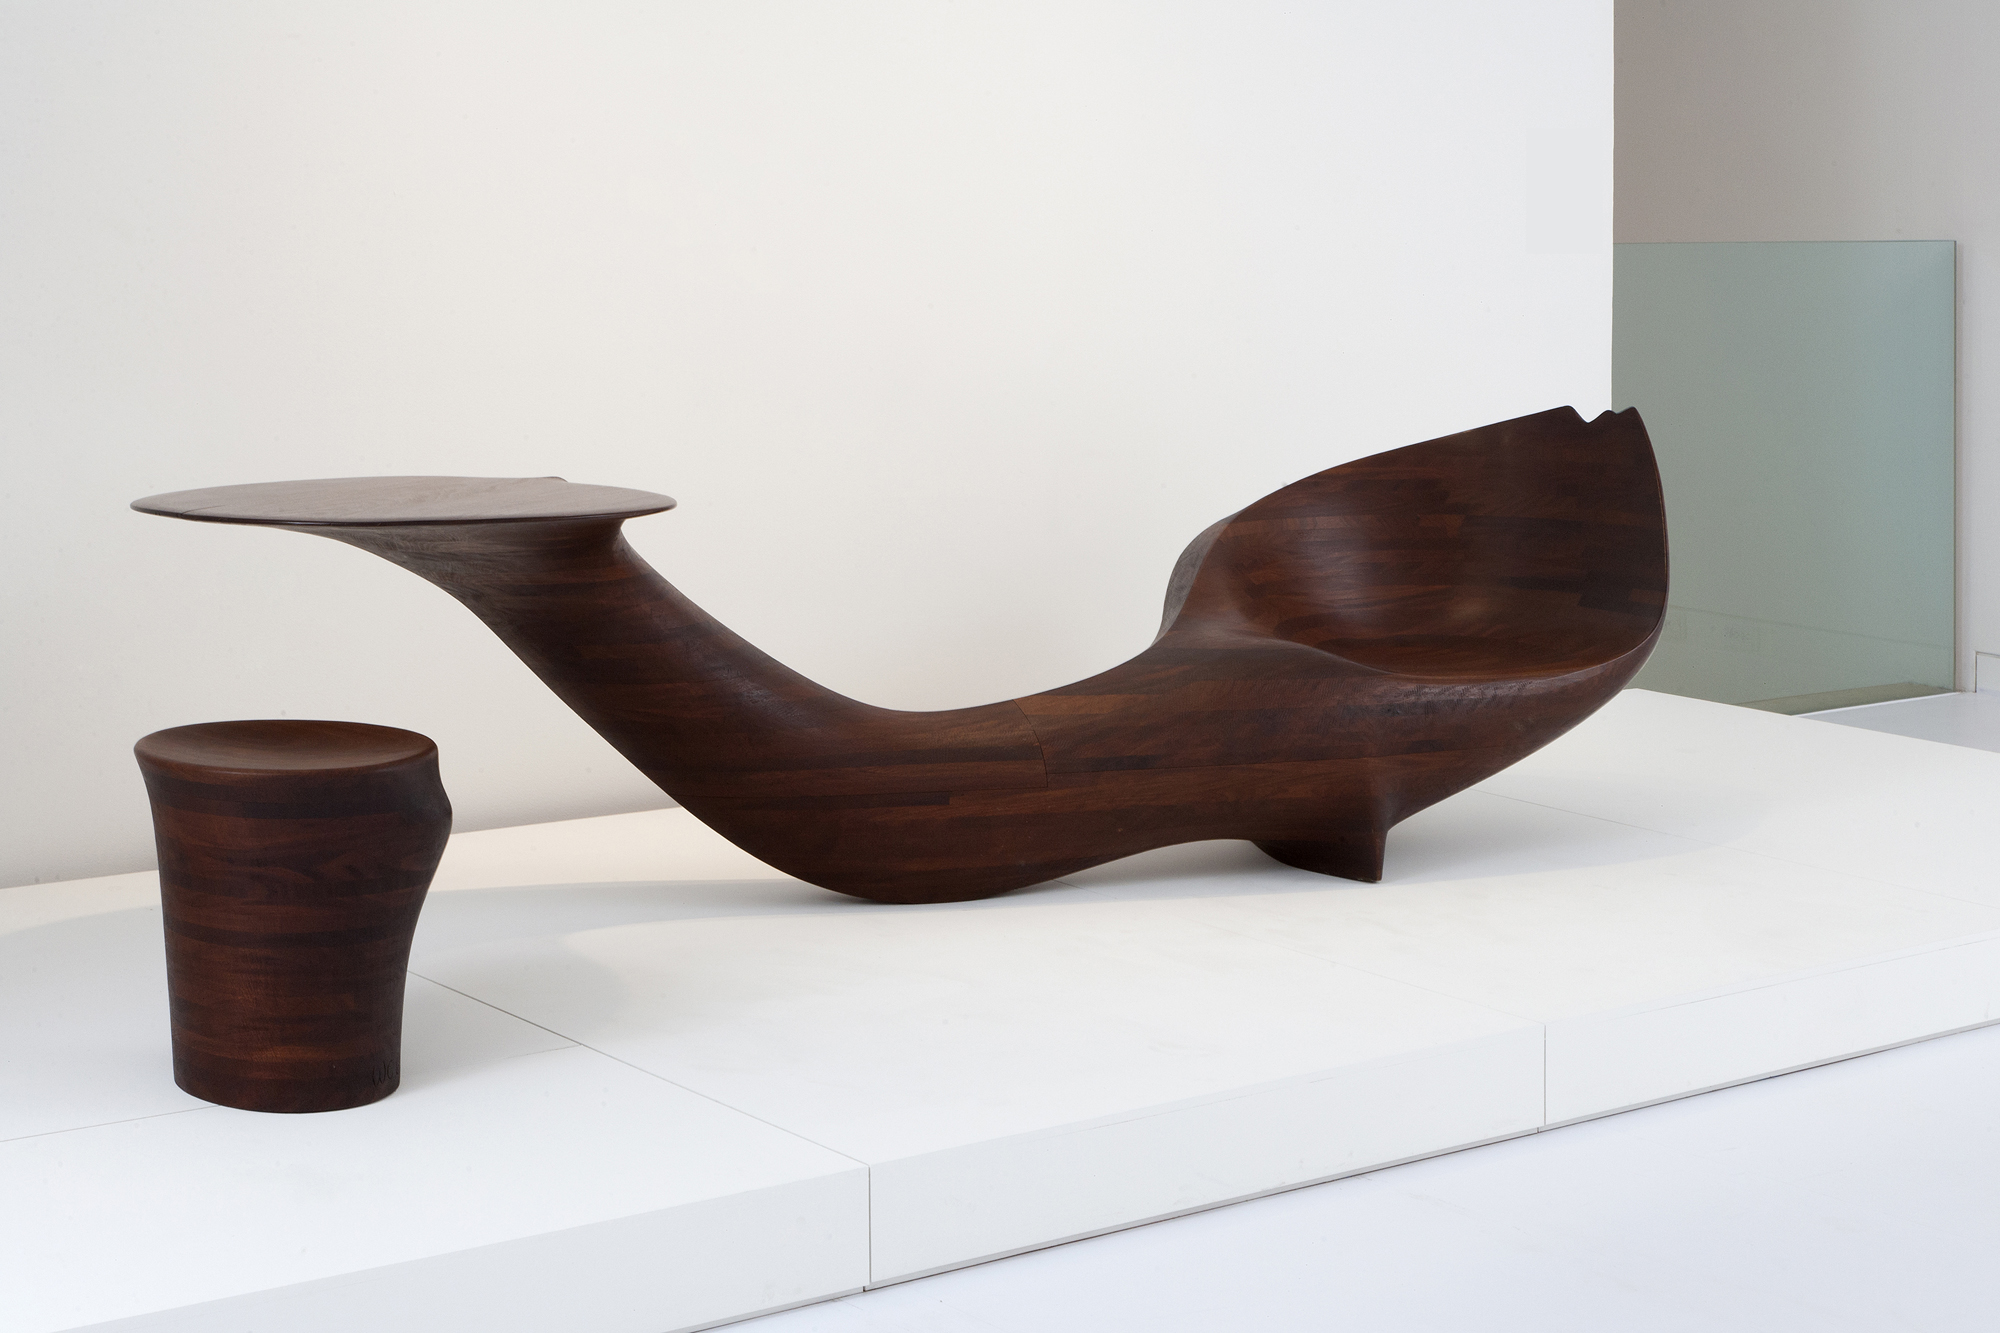 Wendell Castle, 'Table-Chair-Stool,' 1968, Afromosia and African hardwoods. Museum of Arts and Design, gift of the Johnson Wax Company, through the American Craft Council, 1977. Photo courtesy of Sherry Griffin/R & Company © Wendell Castle, Inc.